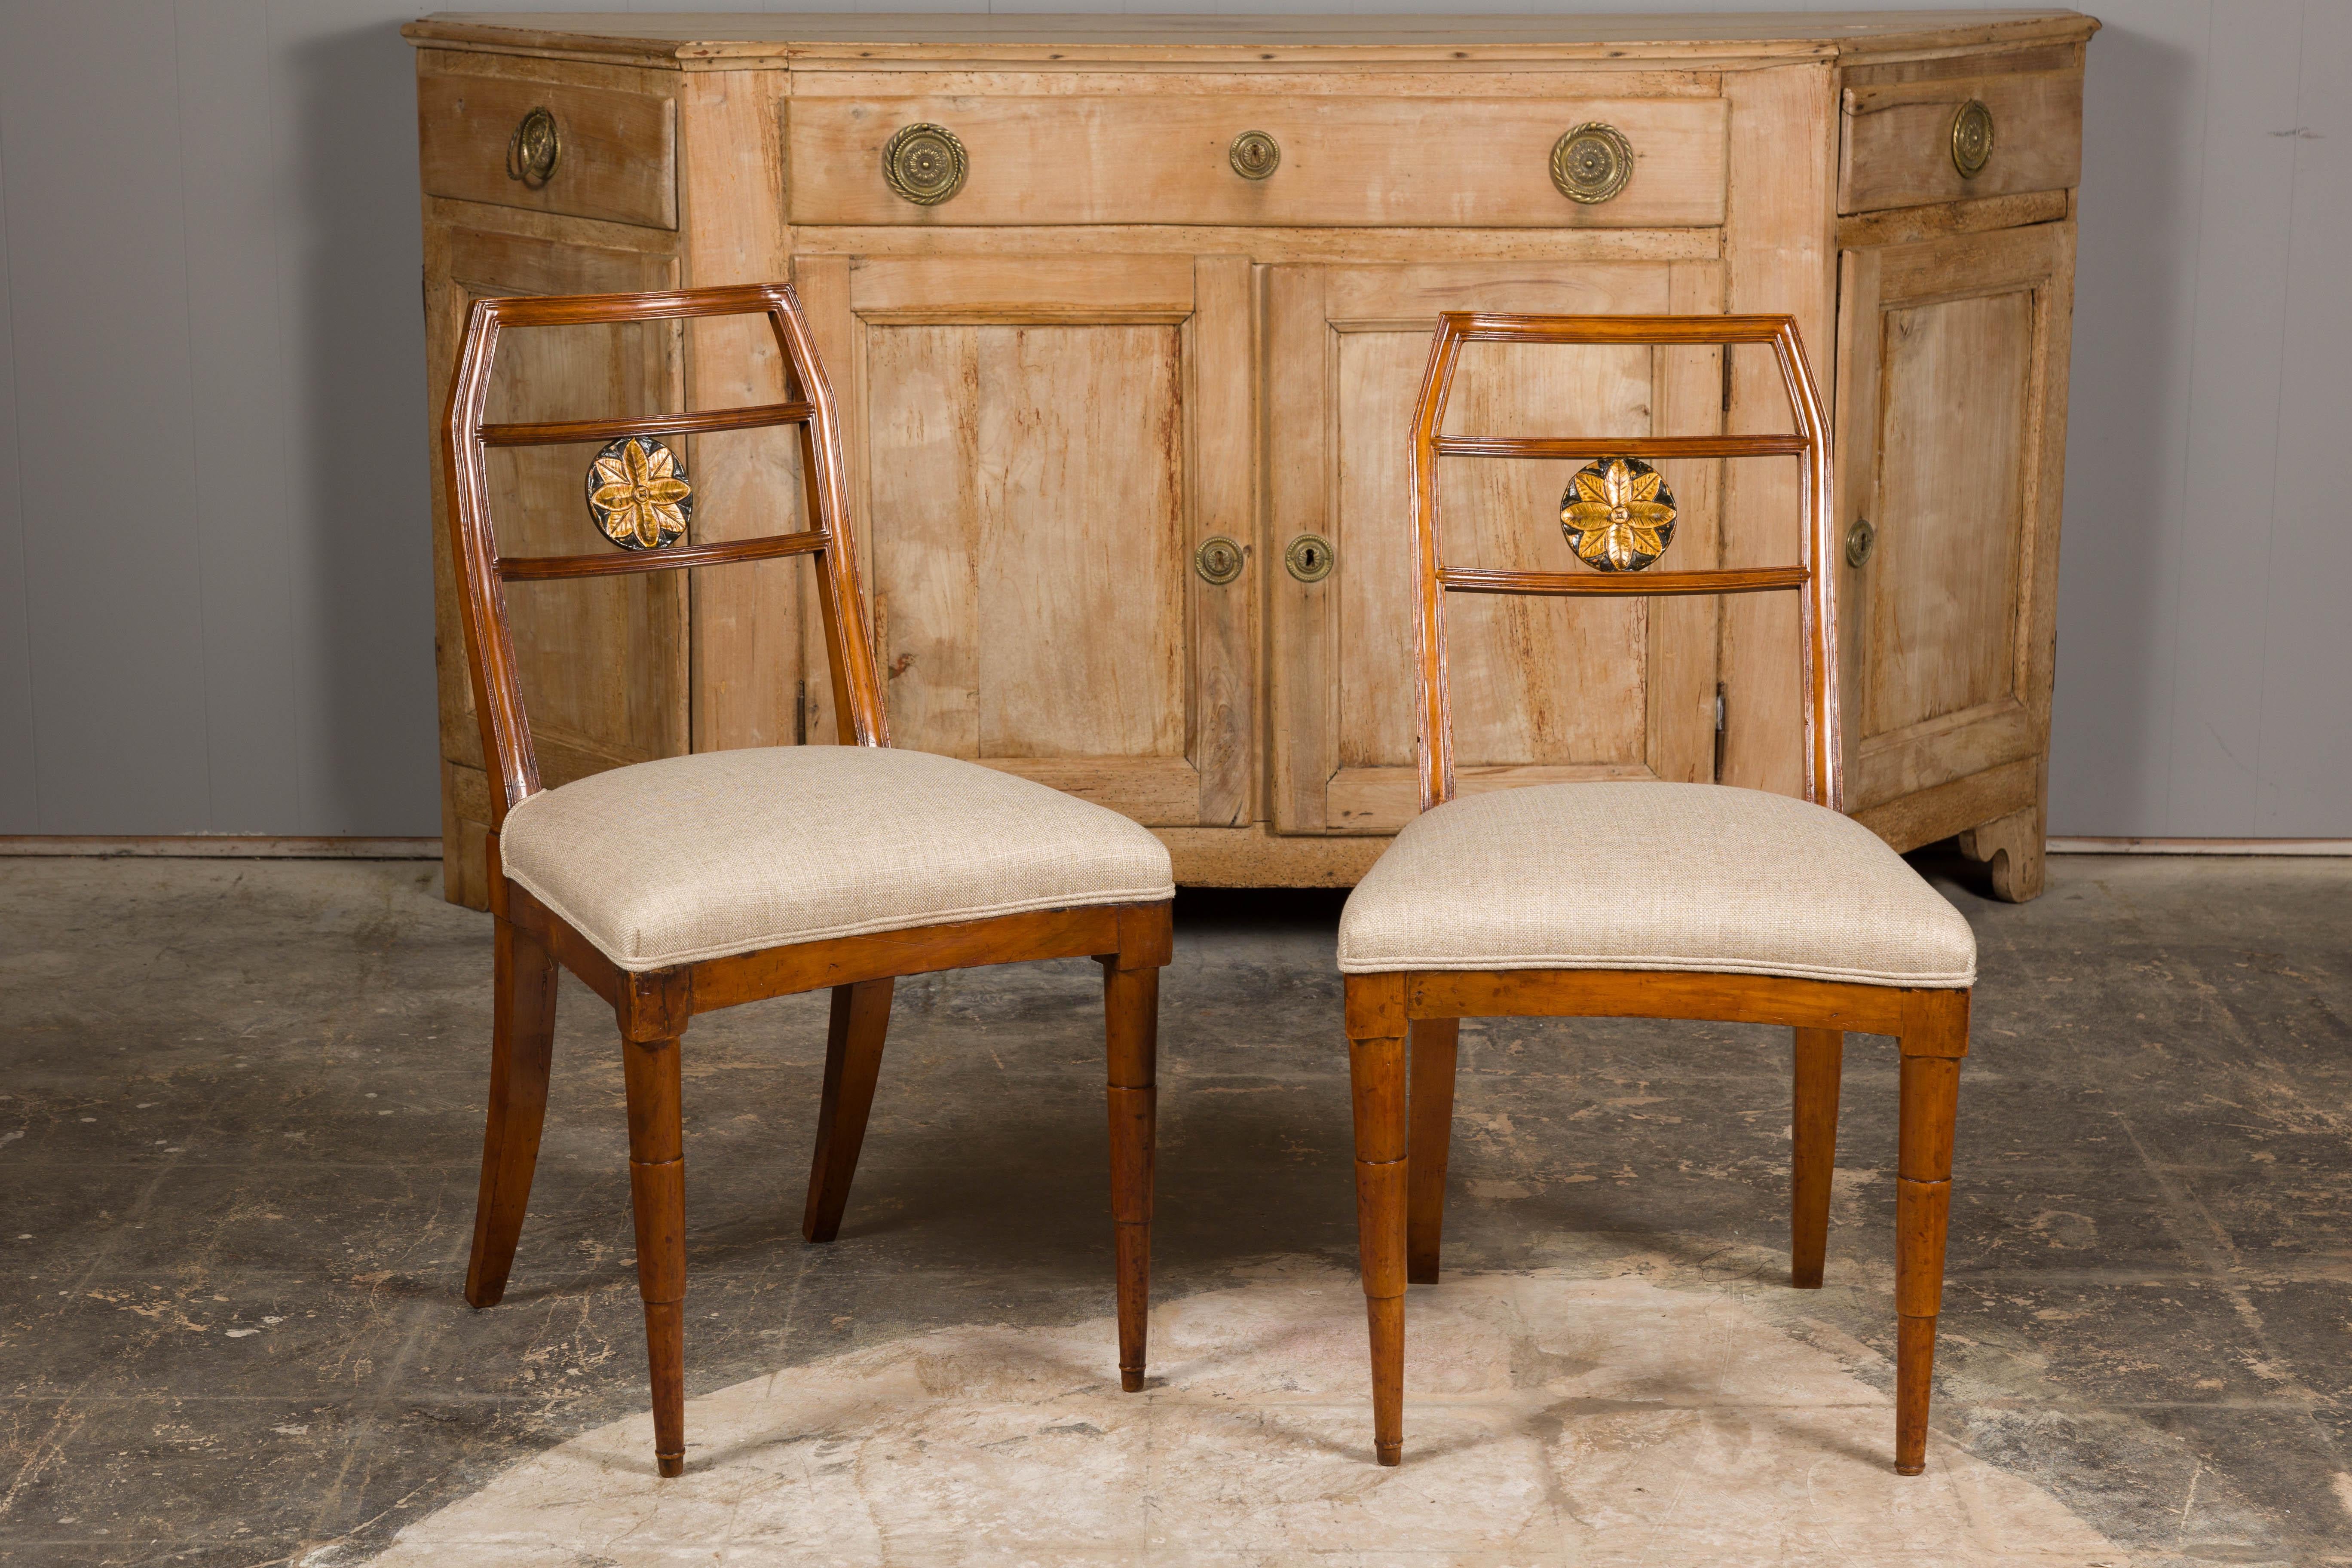 A pair of Italian walnut side chairs from circa 1800 with carved and gilt floral medallion adorning each back, custom linen upholstery and tapering legs in the front. This pair of Italian walnut side chairs, dating back to circa 1800 is a